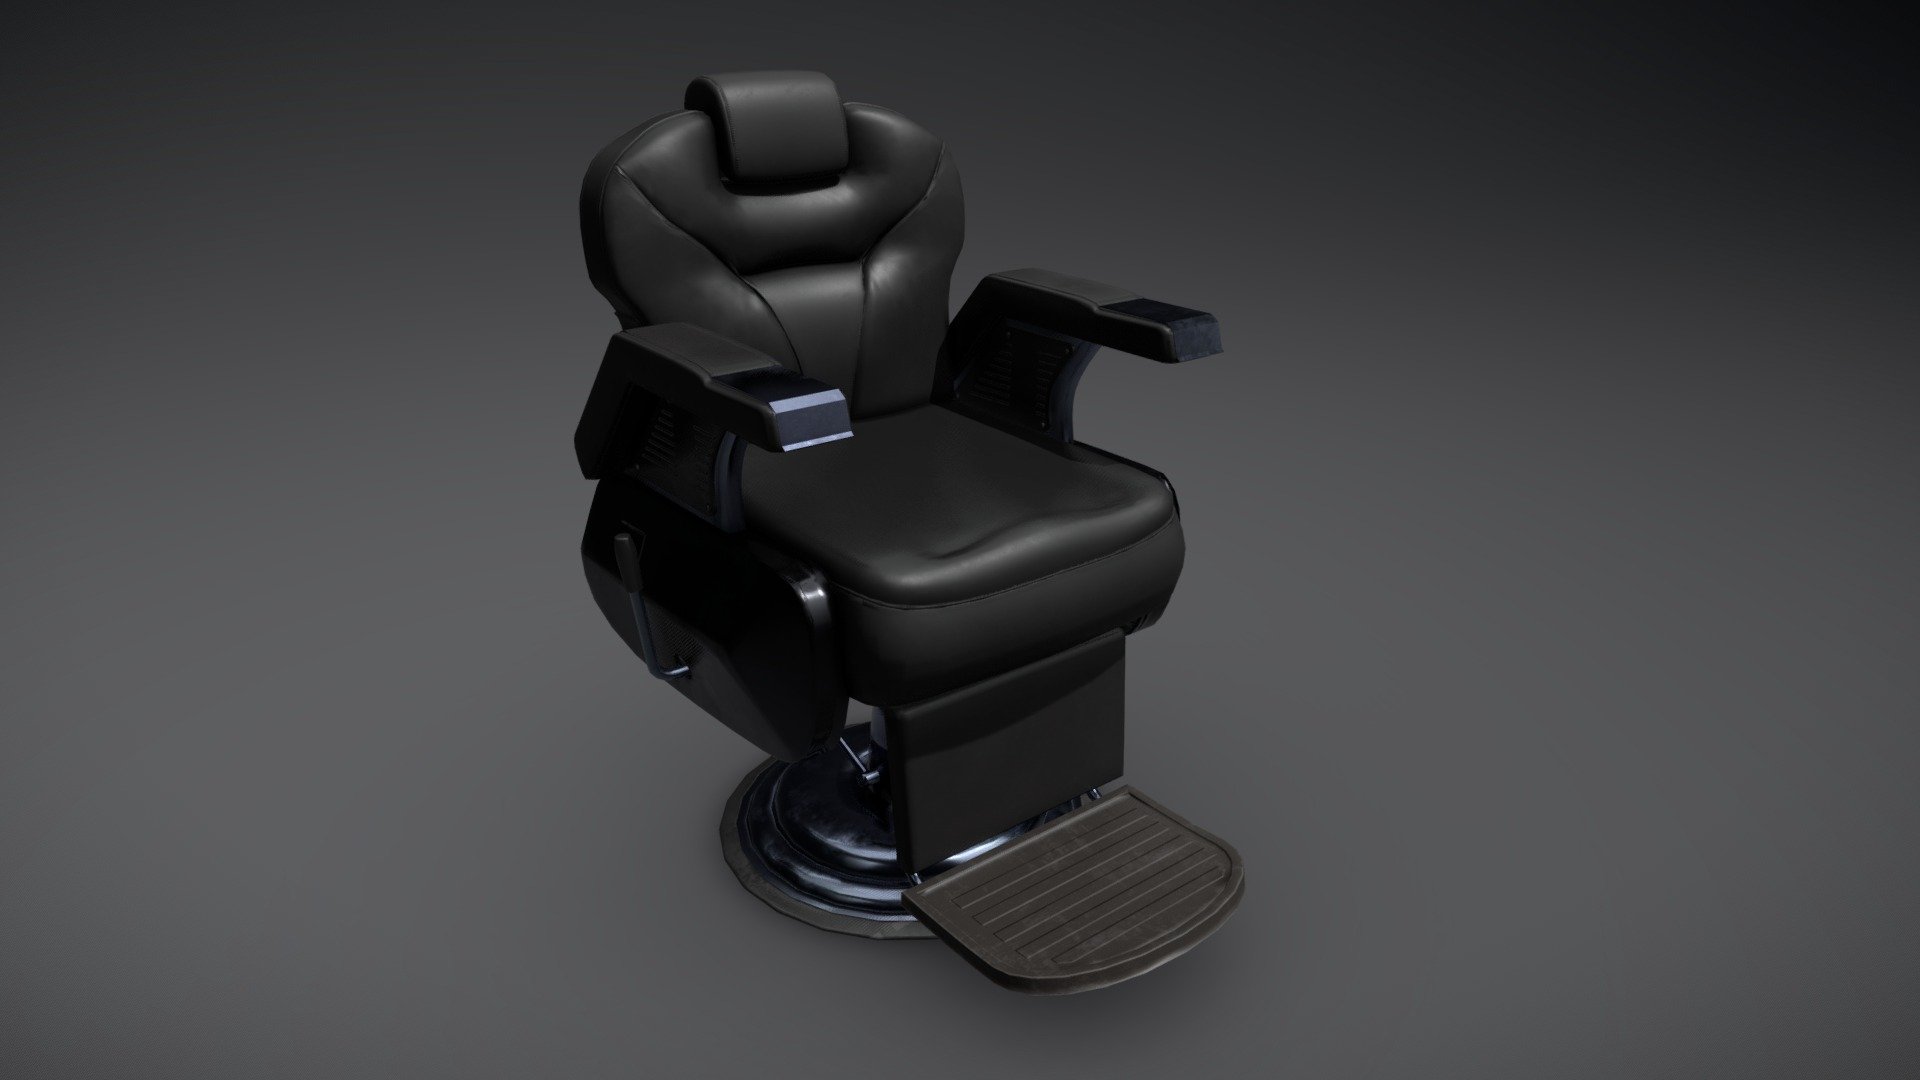 Black leather adjusted barber chair model
Modeled to scale in mm

Clean UV tiles no overlaps
Textures Separated by component type
Leather + Metal + Plastic: 4096x4096
AO
Albedo
Metal
Normal 
Roughness - Barber Chair - Download Free 3D model by Tyron (@Omty) 3d model